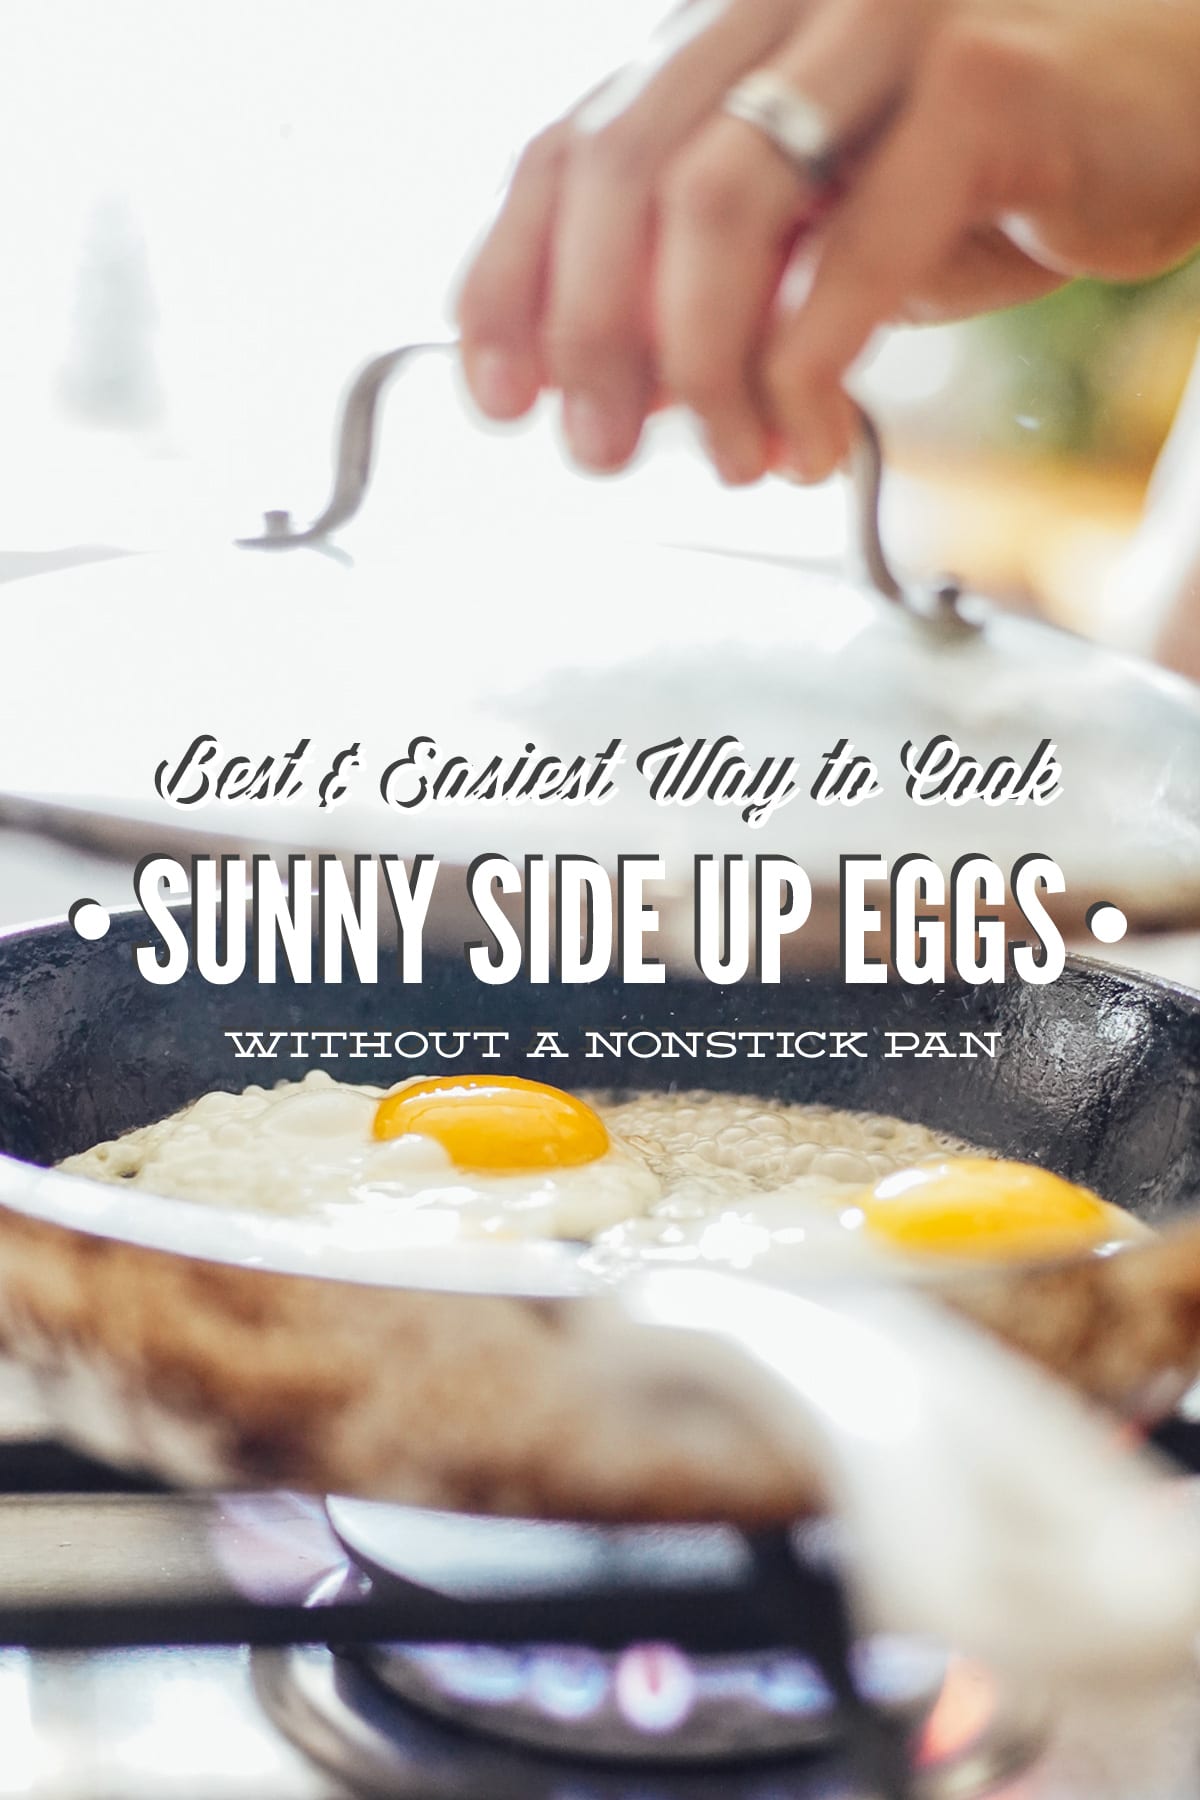 How to Cook Sunny Side Up Eggs Without Sticking